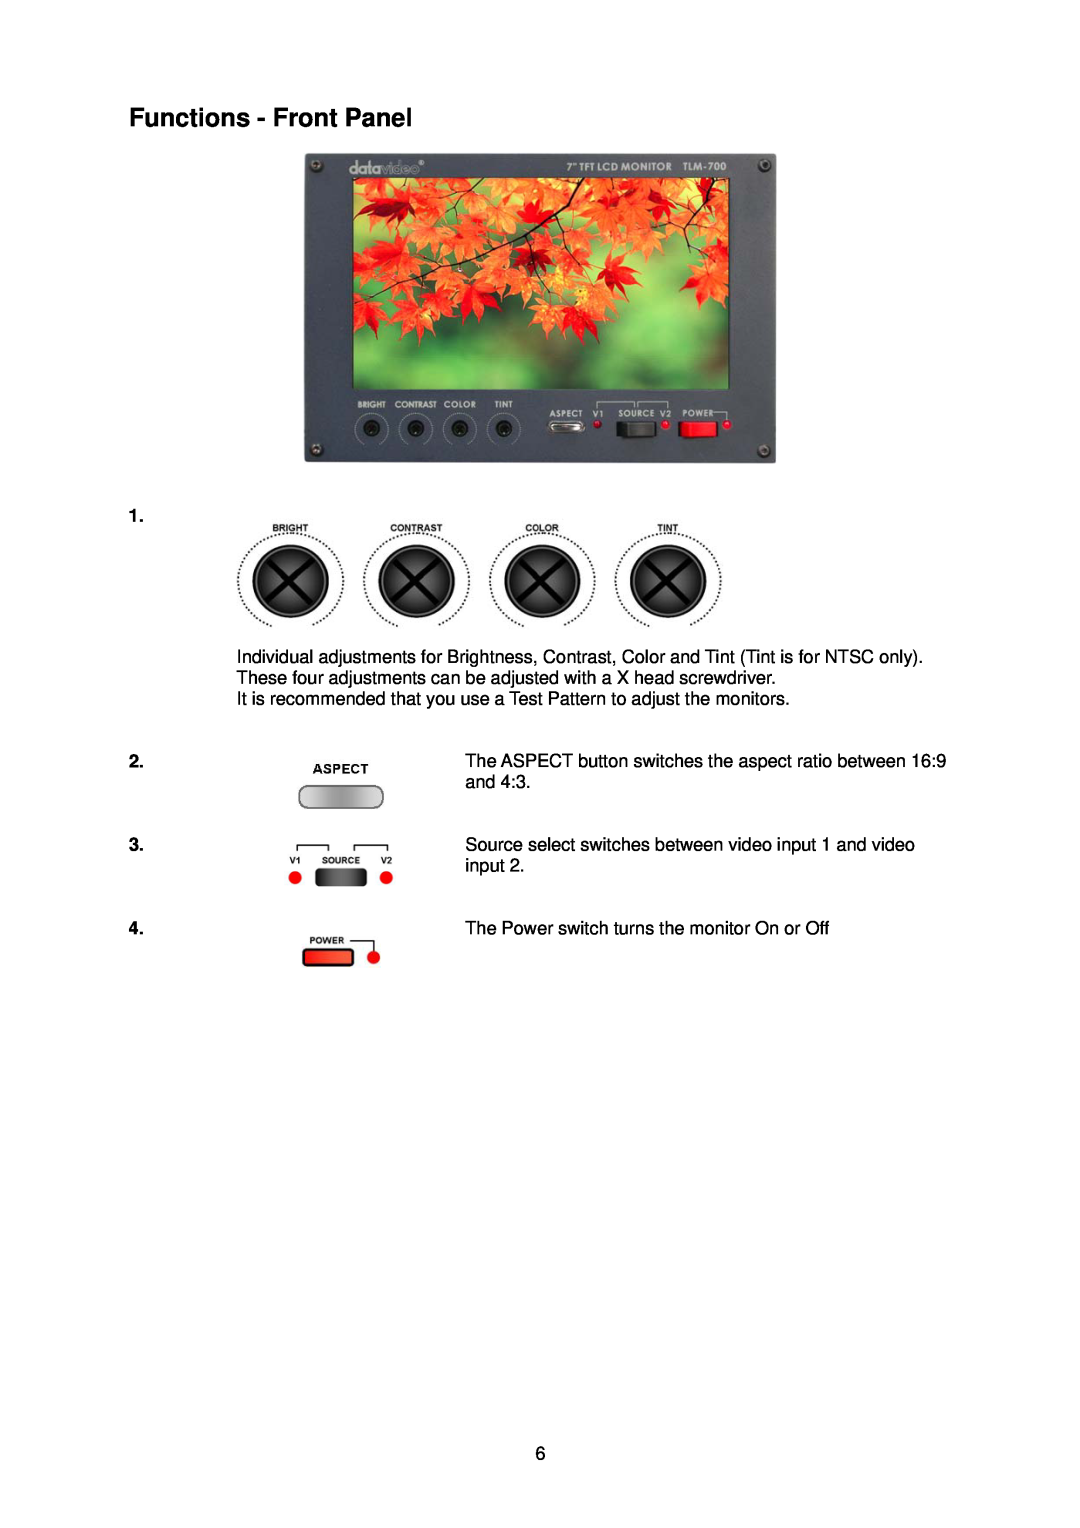 Datavideo TLM-700 Functions - Front Panel, These four adjustments can be adjusted with a X head screwdriver, input 